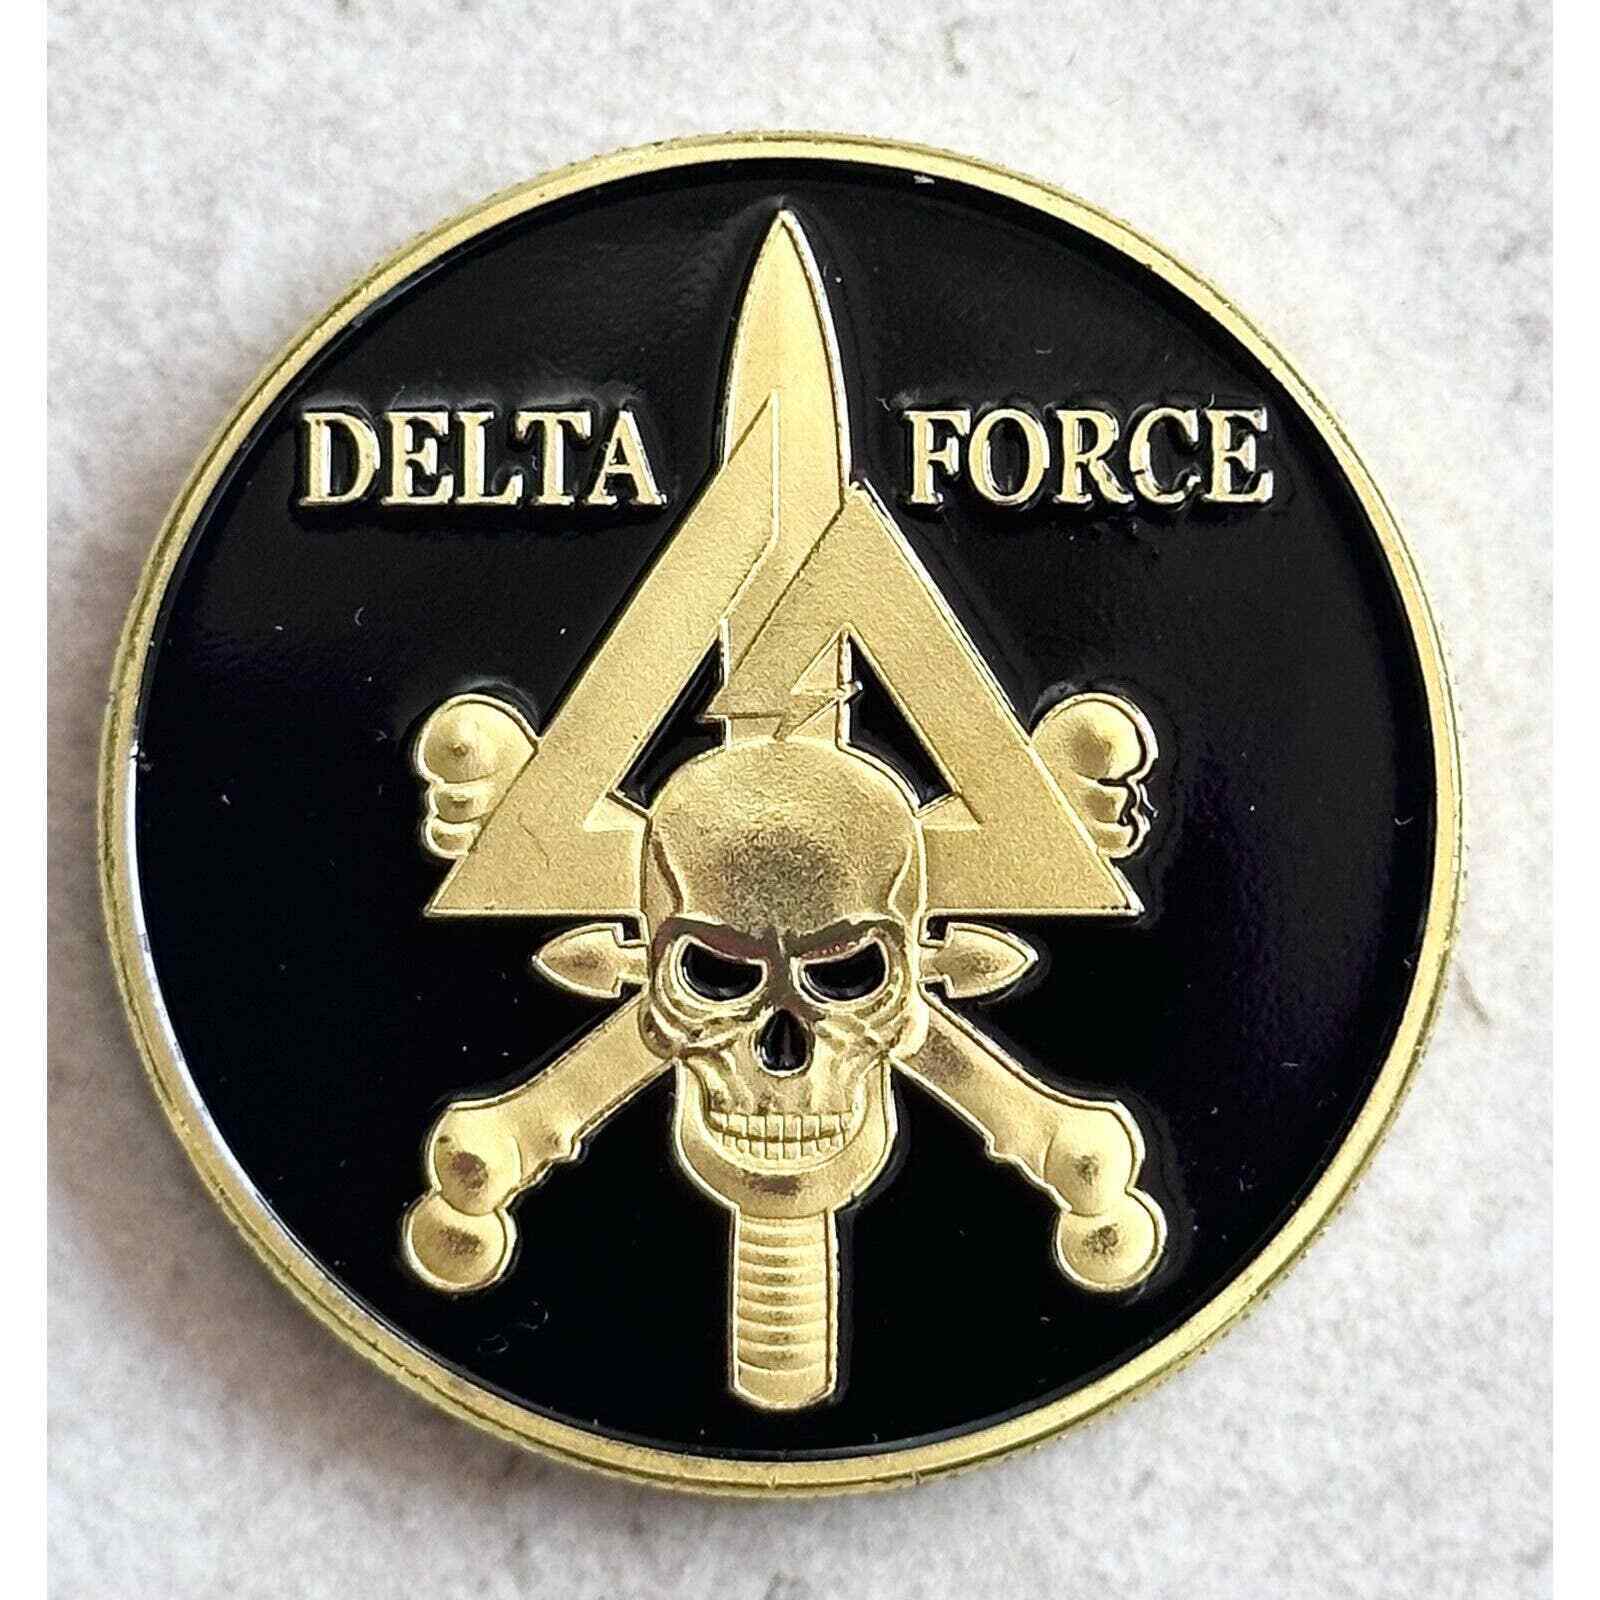 U S ARMY DELTA FORCE Challenge Coin